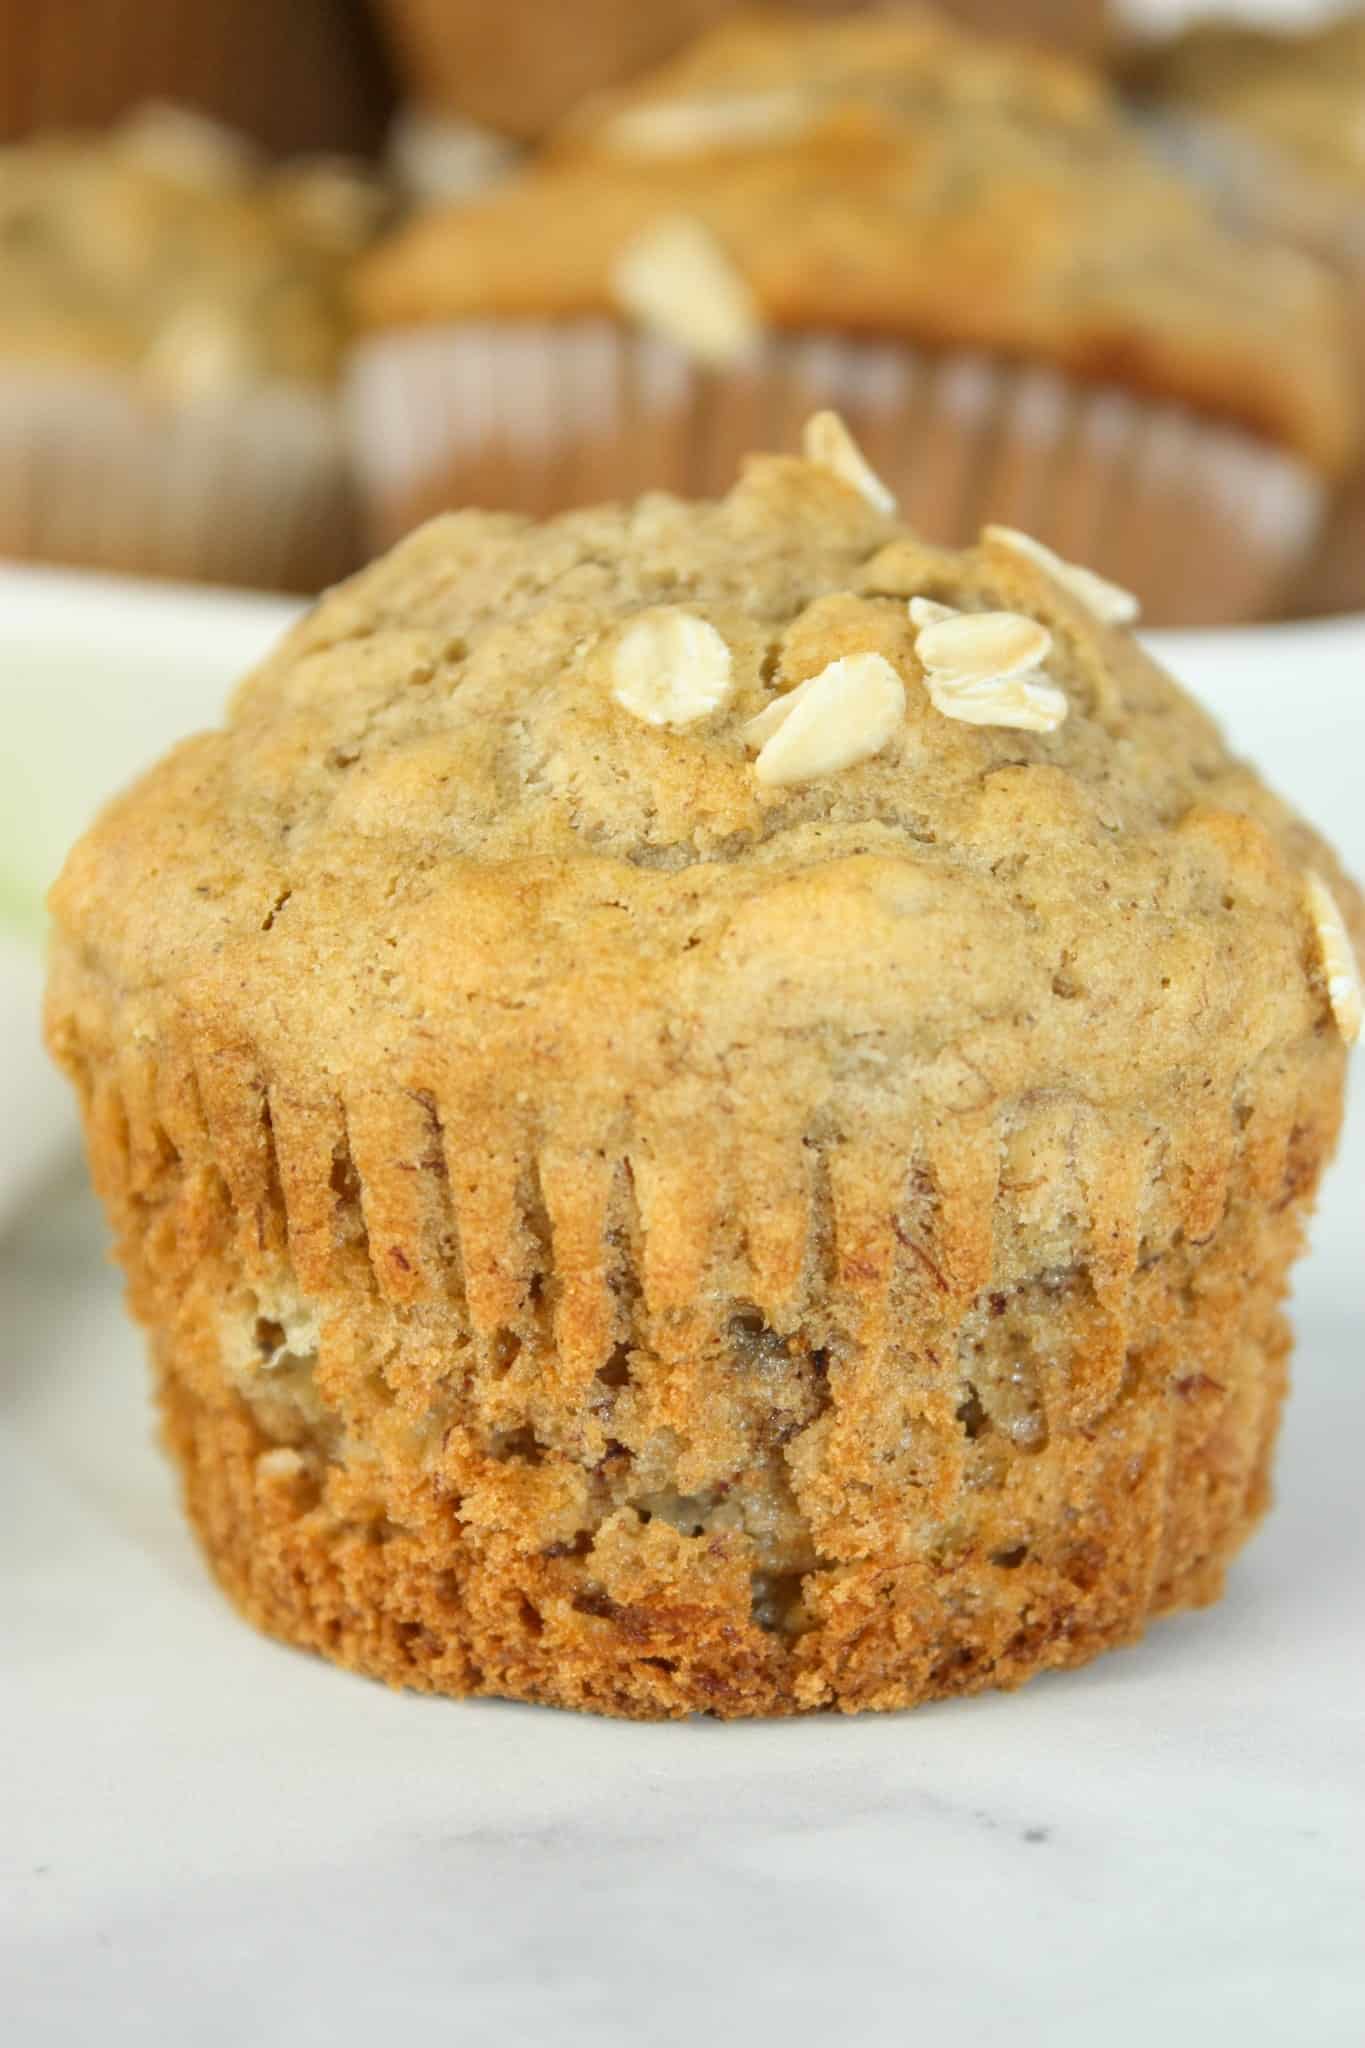 Gluten Free Banana Oatmeal Muffins are a quick and easy recipe to use up those over ripe bananas that seem to appear on everyone's kitchen counter!  